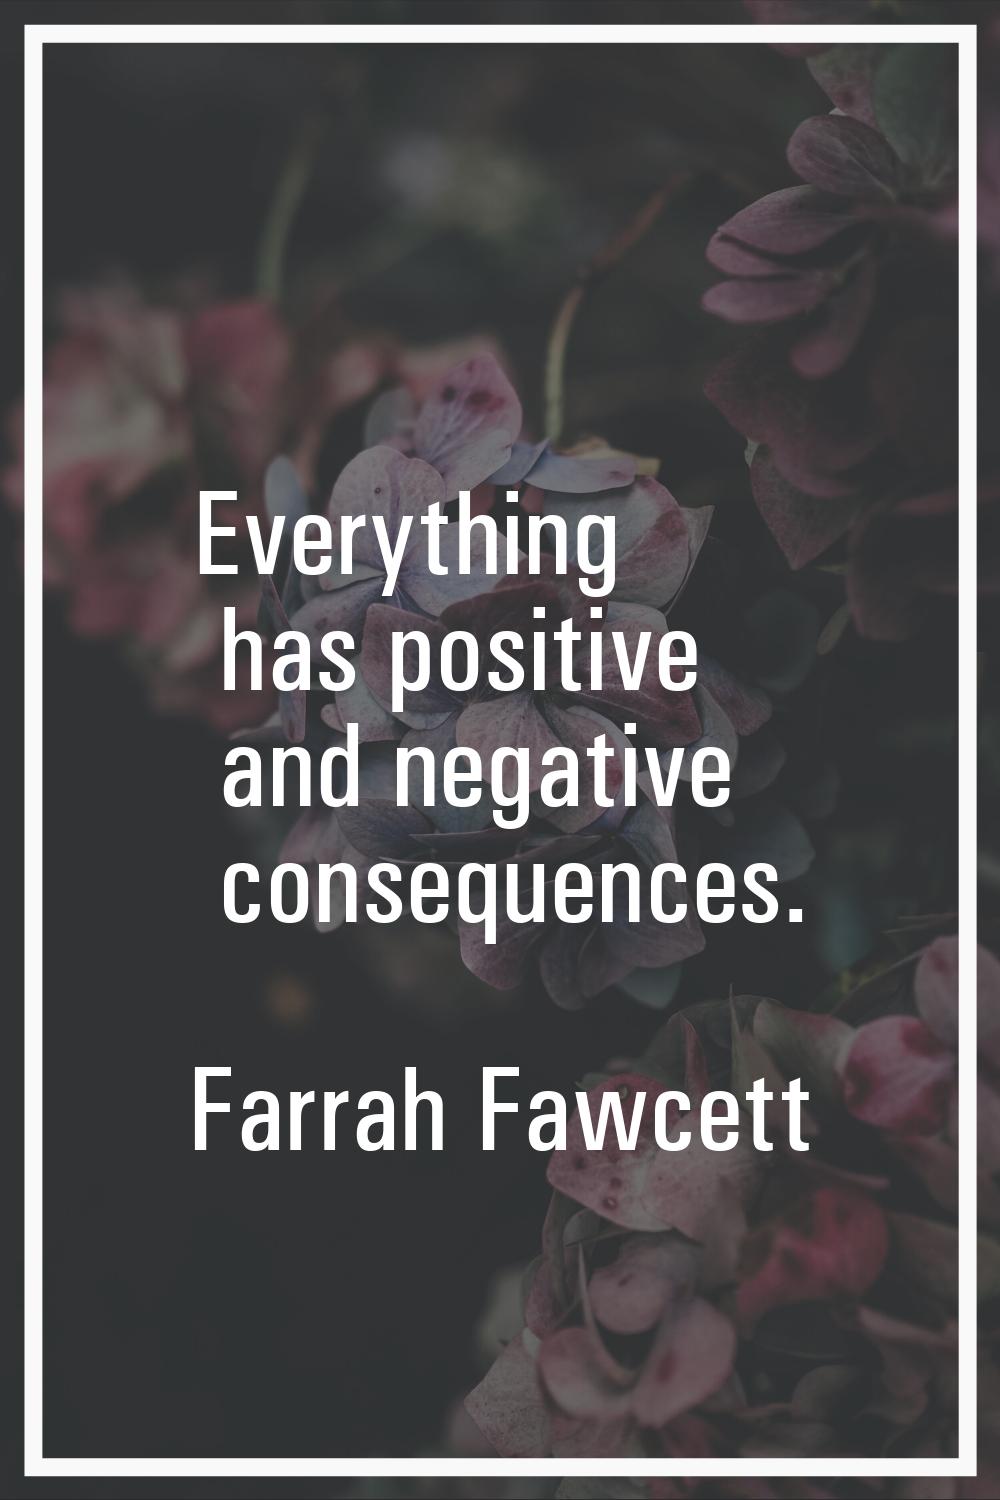 Everything has positive and negative consequences.